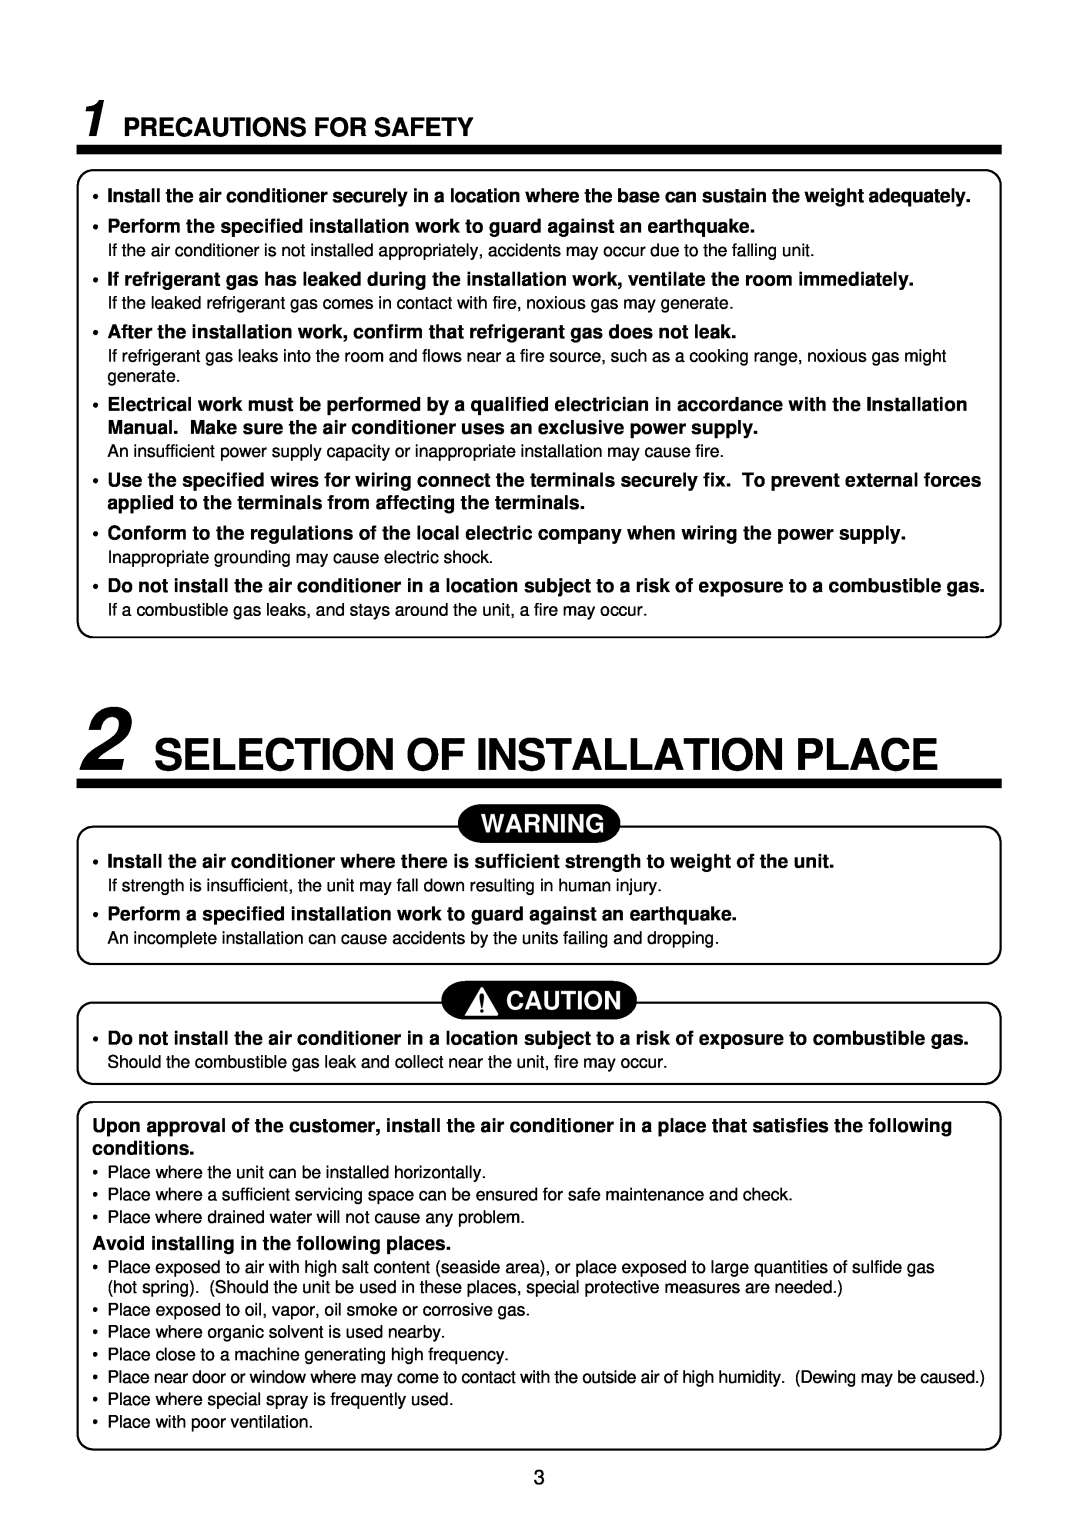 Toshiba MMK-AP0122H, MMK-AP0072H, MMK-AP0092H installation manual Selection Of Installation Place, Precautions For Safety 